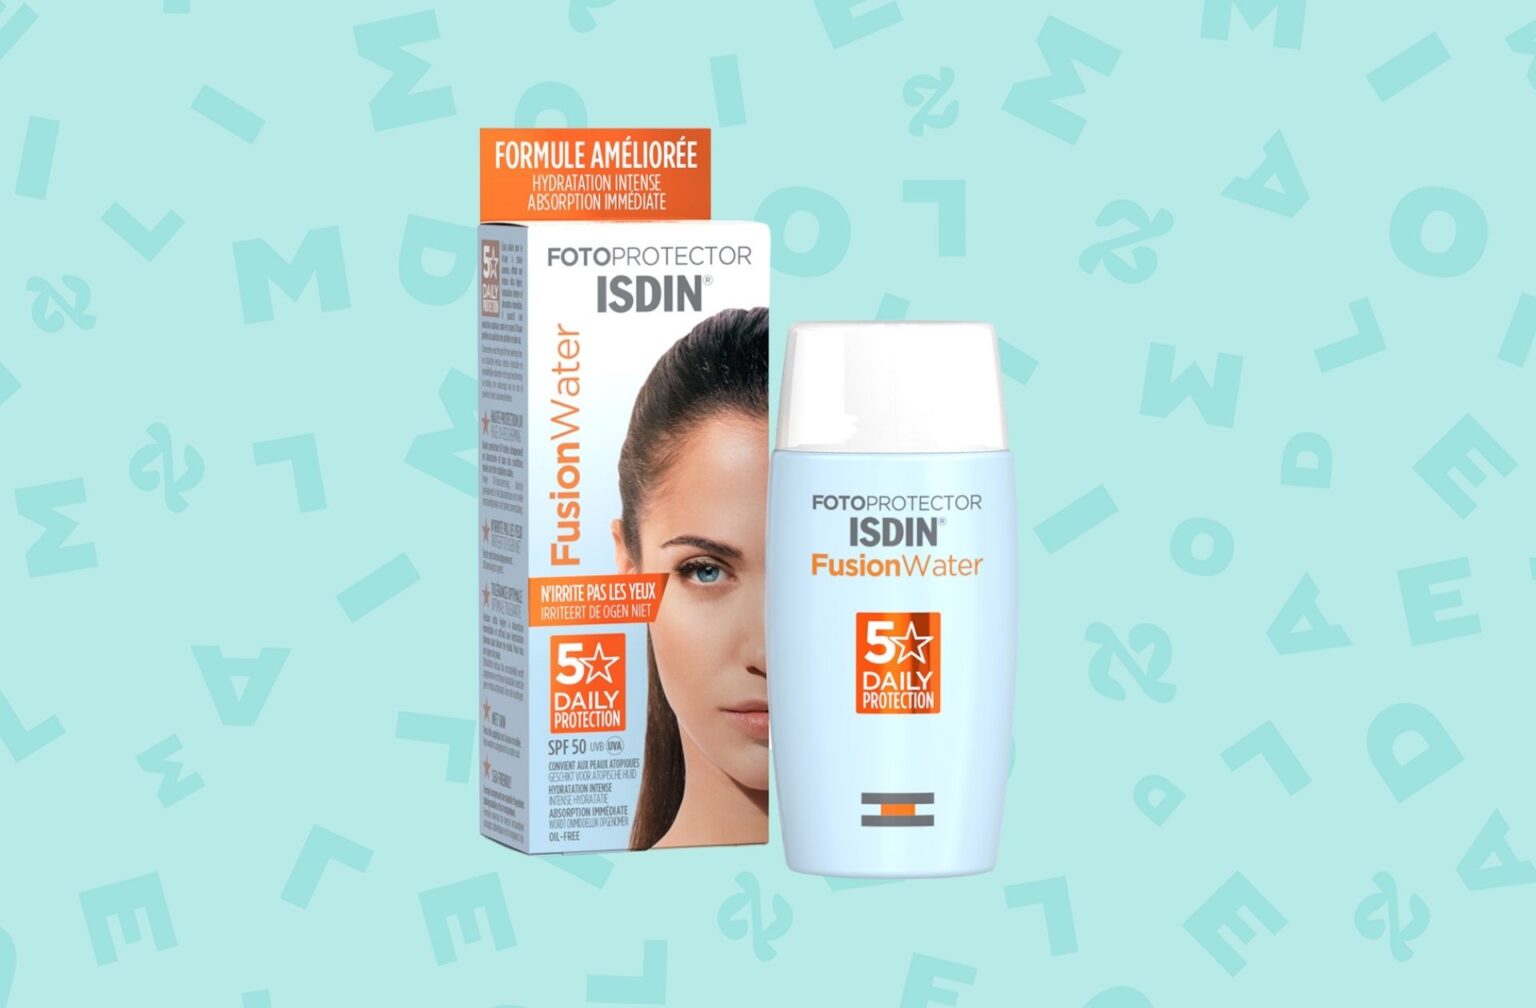 Fotoprotector Fusion Water SPF50 — Isdin — 15,68€ les 50ml